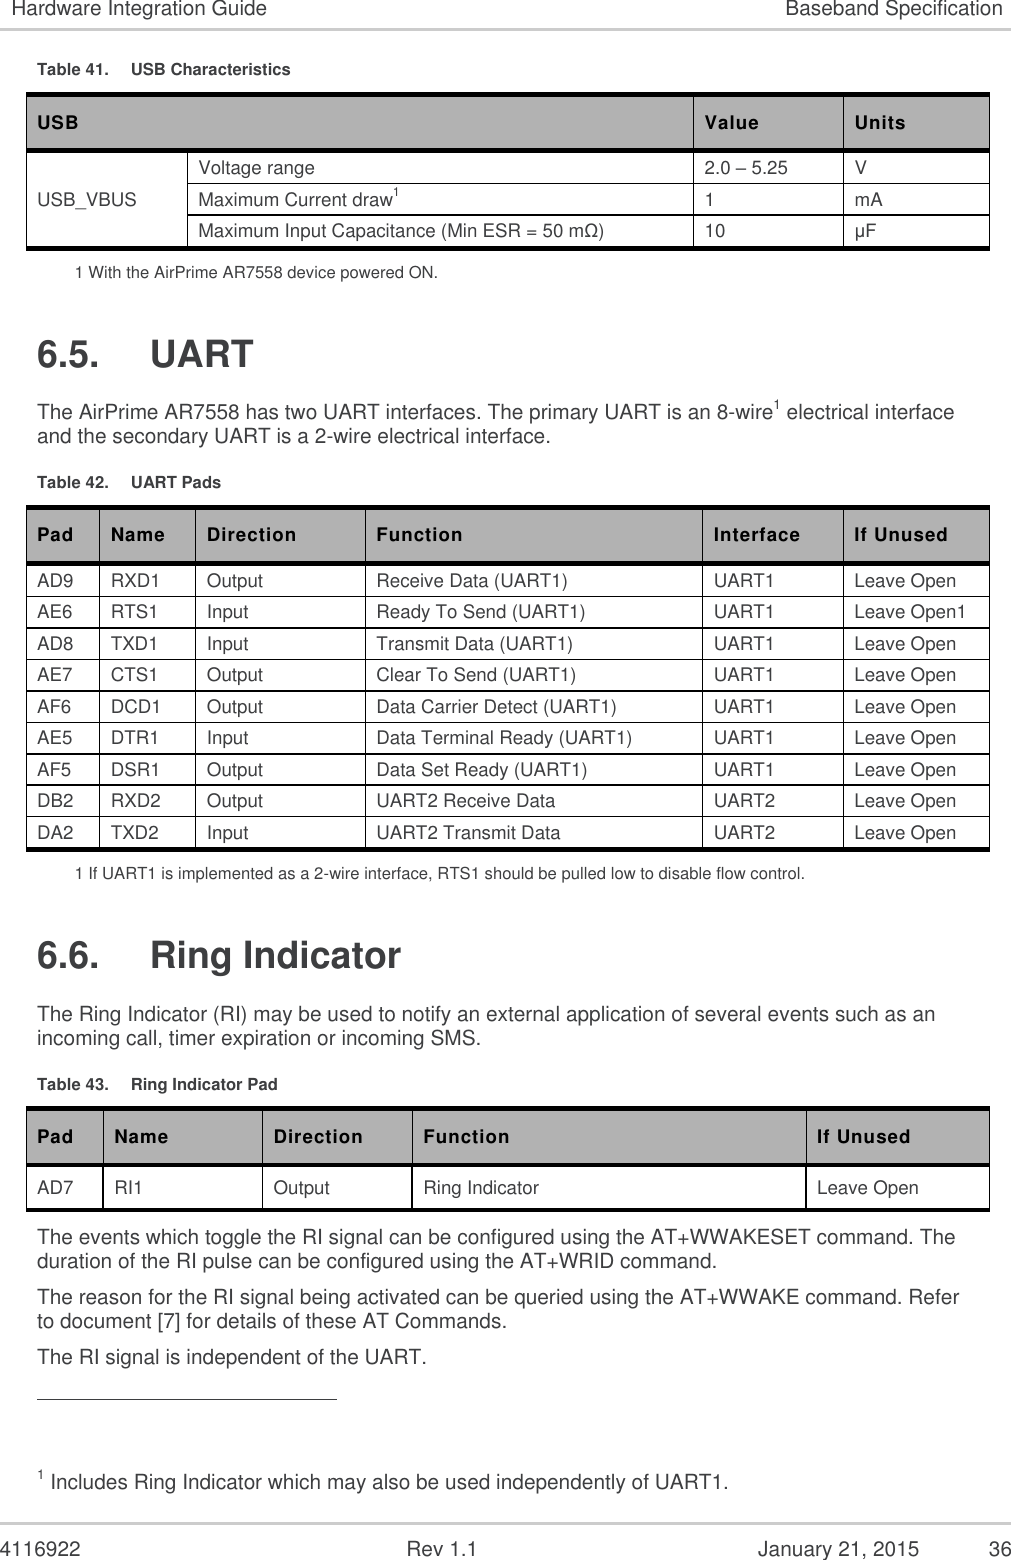   4116922              Rev 1.1          January 21, 2015  36 Hardware Integration Guide Baseband Specification Table 41.  USB Characteristics USB Value Units USB_VBUS  Voltage range 2.0 – 5.25 V Maximum Current draw1 1 mA Maximum Input Capacitance (Min ESR = 50 mΩ) 10 μF 1 With the AirPrime AR7558 device powered ON. 6.5.  UART The AirPrime AR7558 has two UART interfaces. The primary UART is an 8-wire1 electrical interface and the secondary UART is a 2-wire electrical interface.   Table 42.  UART Pads Pad Name Direction Function Interface If Unused AD9 RXD1 Output Receive Data (UART1) UART1 Leave Open AE6 RTS1 Input Ready To Send (UART1) UART1 Leave Open1 AD8 TXD1 Input Transmit Data (UART1) UART1 Leave Open AE7 CTS1 Output Clear To Send (UART1) UART1 Leave Open AF6 DCD1 Output Data Carrier Detect (UART1) UART1 Leave Open AE5 DTR1 Input Data Terminal Ready (UART1) UART1 Leave Open AF5 DSR1 Output Data Set Ready (UART1) UART1 Leave Open DB2 RXD2 Output UART2 Receive Data UART2 Leave Open DA2 TXD2 Input UART2 Transmit Data UART2 Leave Open 1 If UART1 is implemented as a 2-wire interface, RTS1 should be pulled low to disable flow control. 6.6.  Ring Indicator The Ring Indicator (RI) may be used to notify an external application of several events such as an incoming call, timer expiration or incoming SMS. Table 43.  Ring Indicator Pad Pad Name Direction Function If Unused AD7 RI1 Output Ring Indicator Leave Open The events which toggle the RI signal can be configured using the AT+WWAKESET command. The duration of the RI pulse can be configured using the AT+WRID command. The reason for the RI signal being activated can be queried using the AT+WWAKE command. Refer to document [7] for details of these AT Commands. The RI signal is independent of the UART.                                                        1 Includes Ring Indicator which may also be used independently of UART1. 